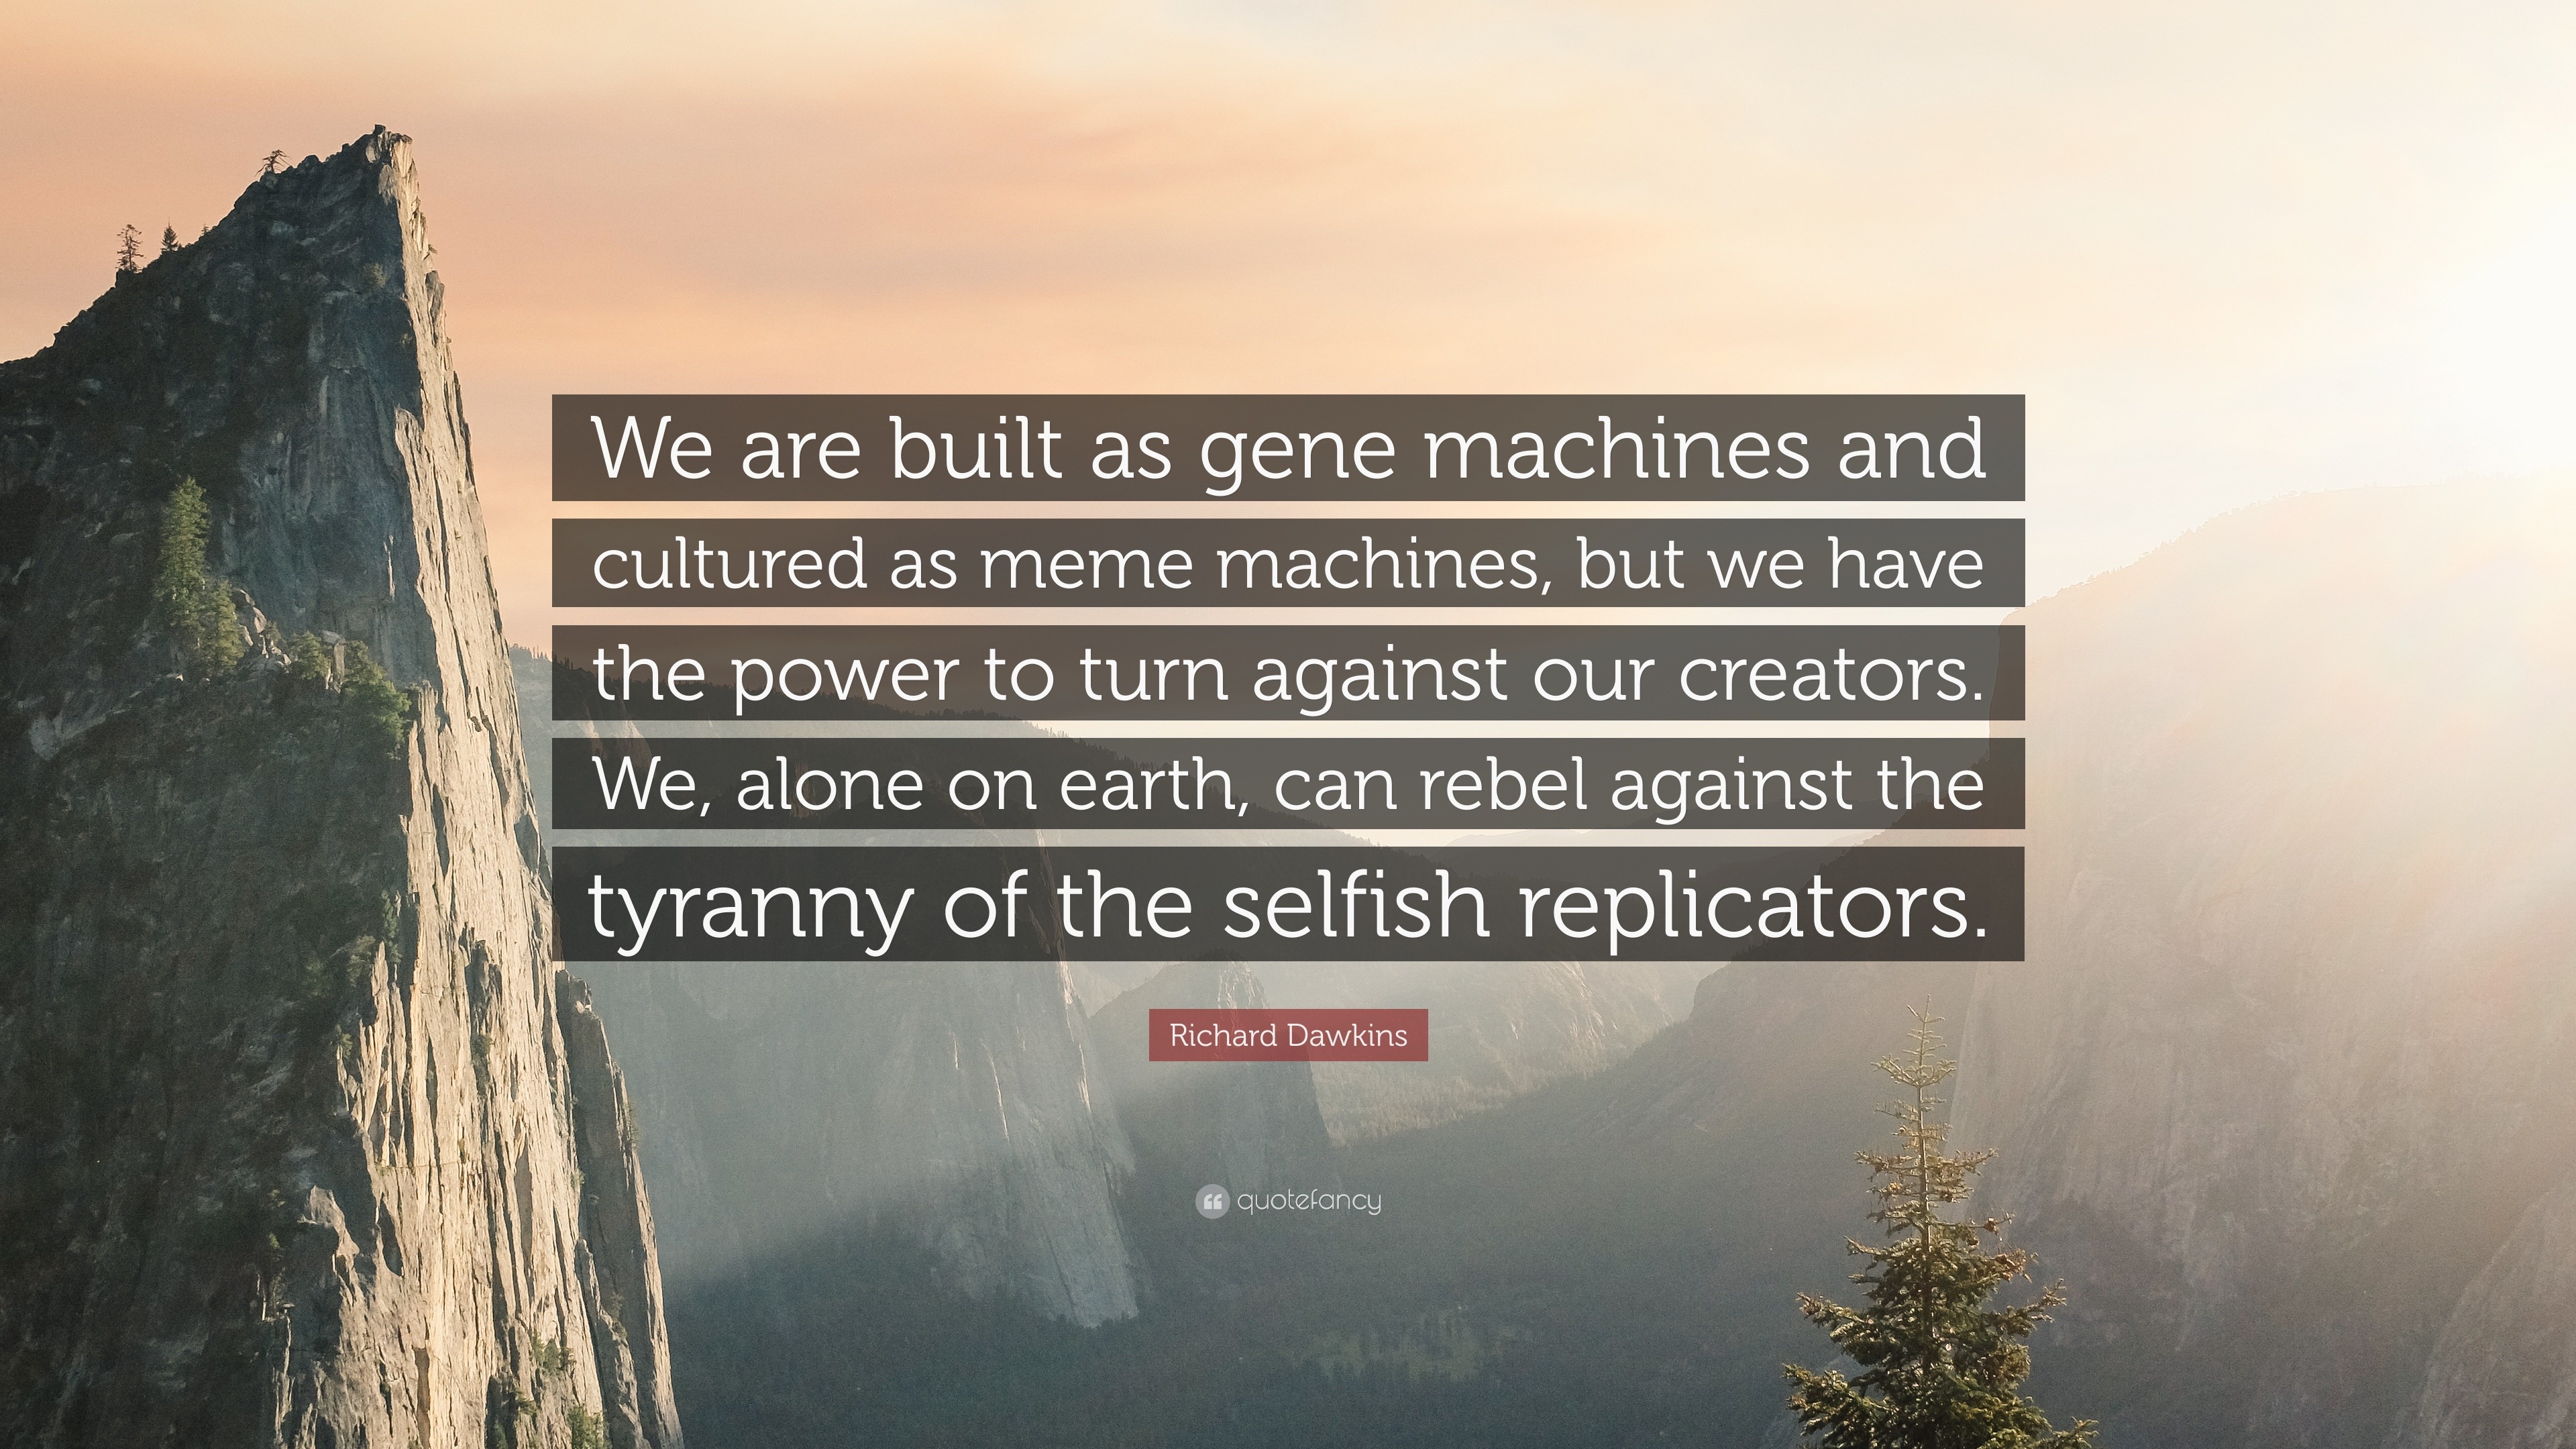 Richard Dawkins Quote: “We Are Built As Gene Machines And Cultured As Meme Machines, But We Have The Power To Turn Against Our Creators. We, Alo...”